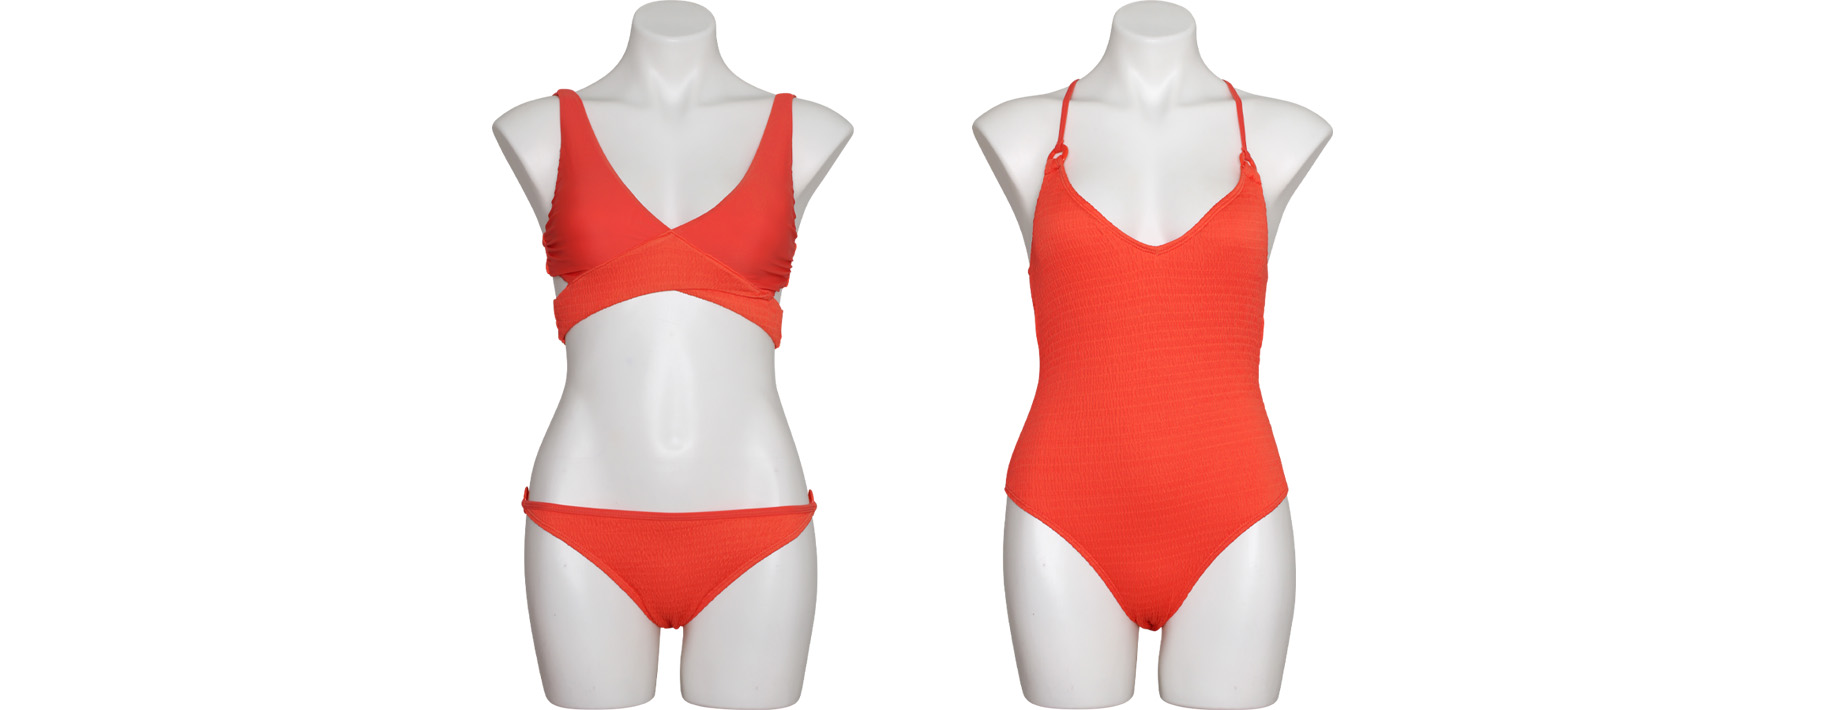 Junior LADIES One-Piece & Two-Piece Swimsuits w/ Adjustable Straps - Coral - Sizes Small-XL